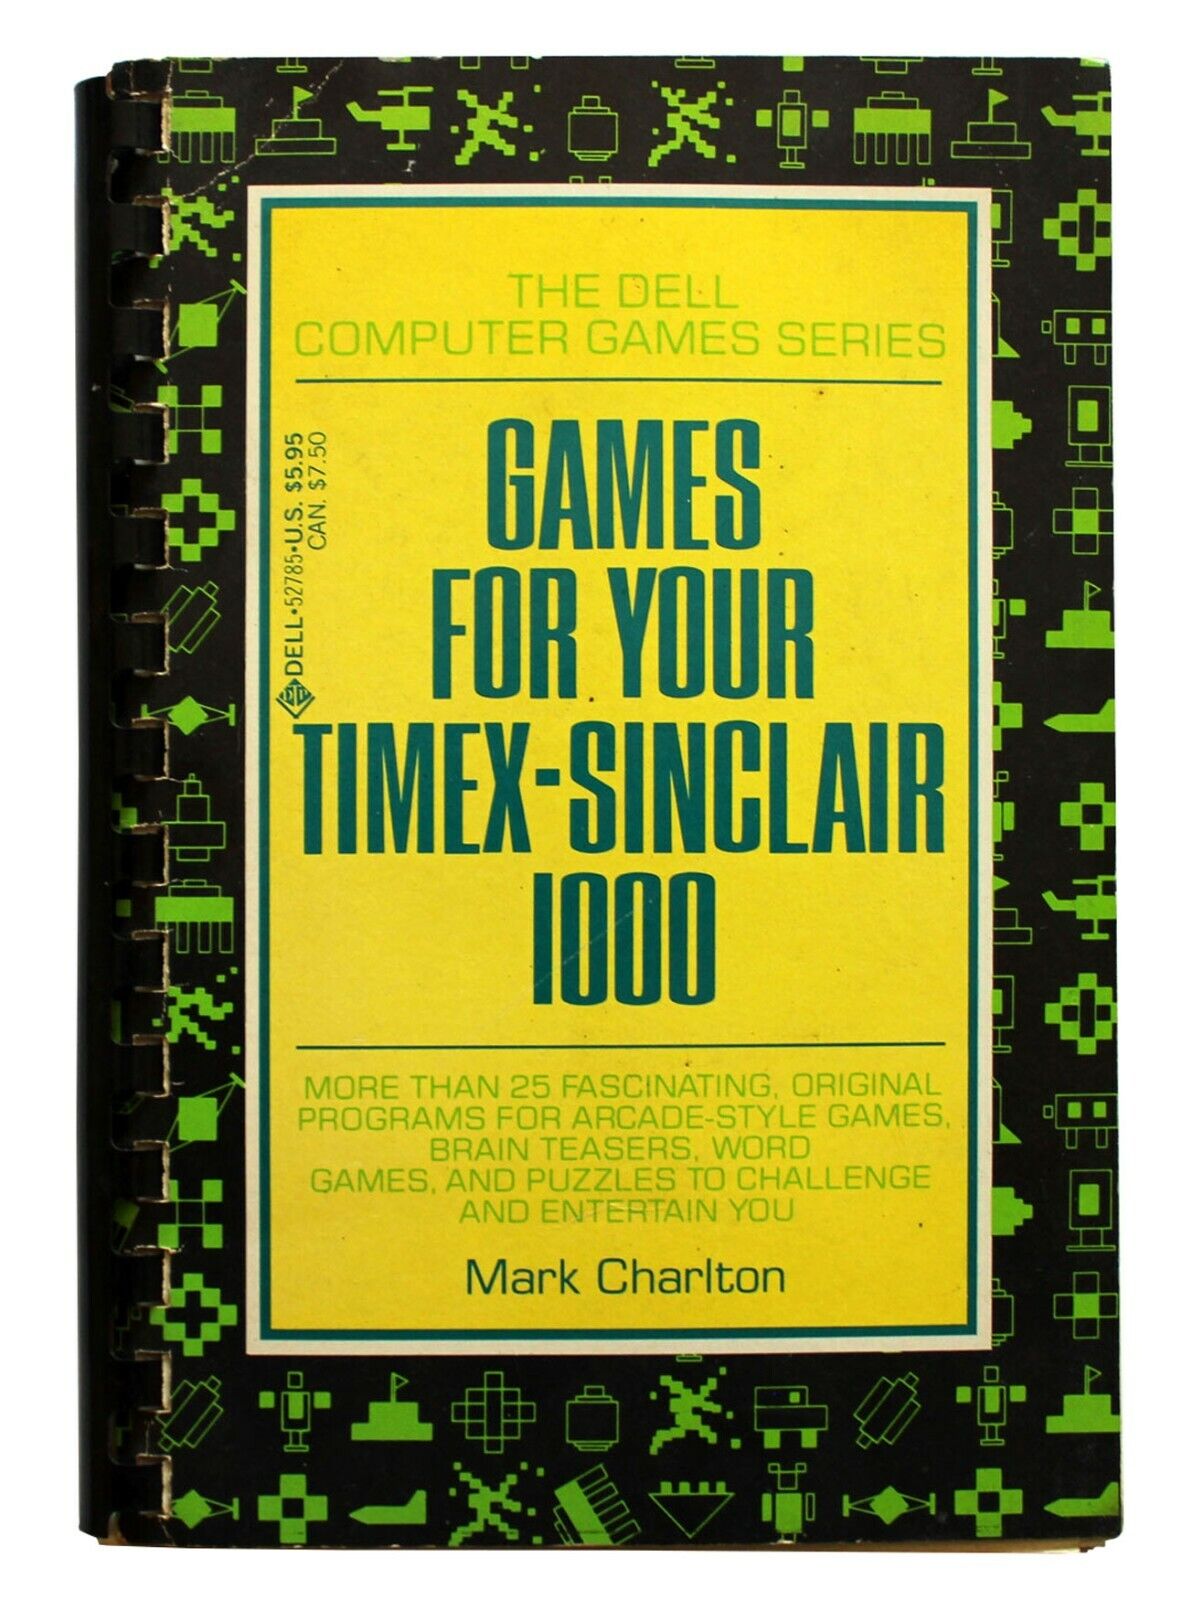 Games For Your Timex Sinclair 1000 Book by Charlton 1983 Vintage Computing